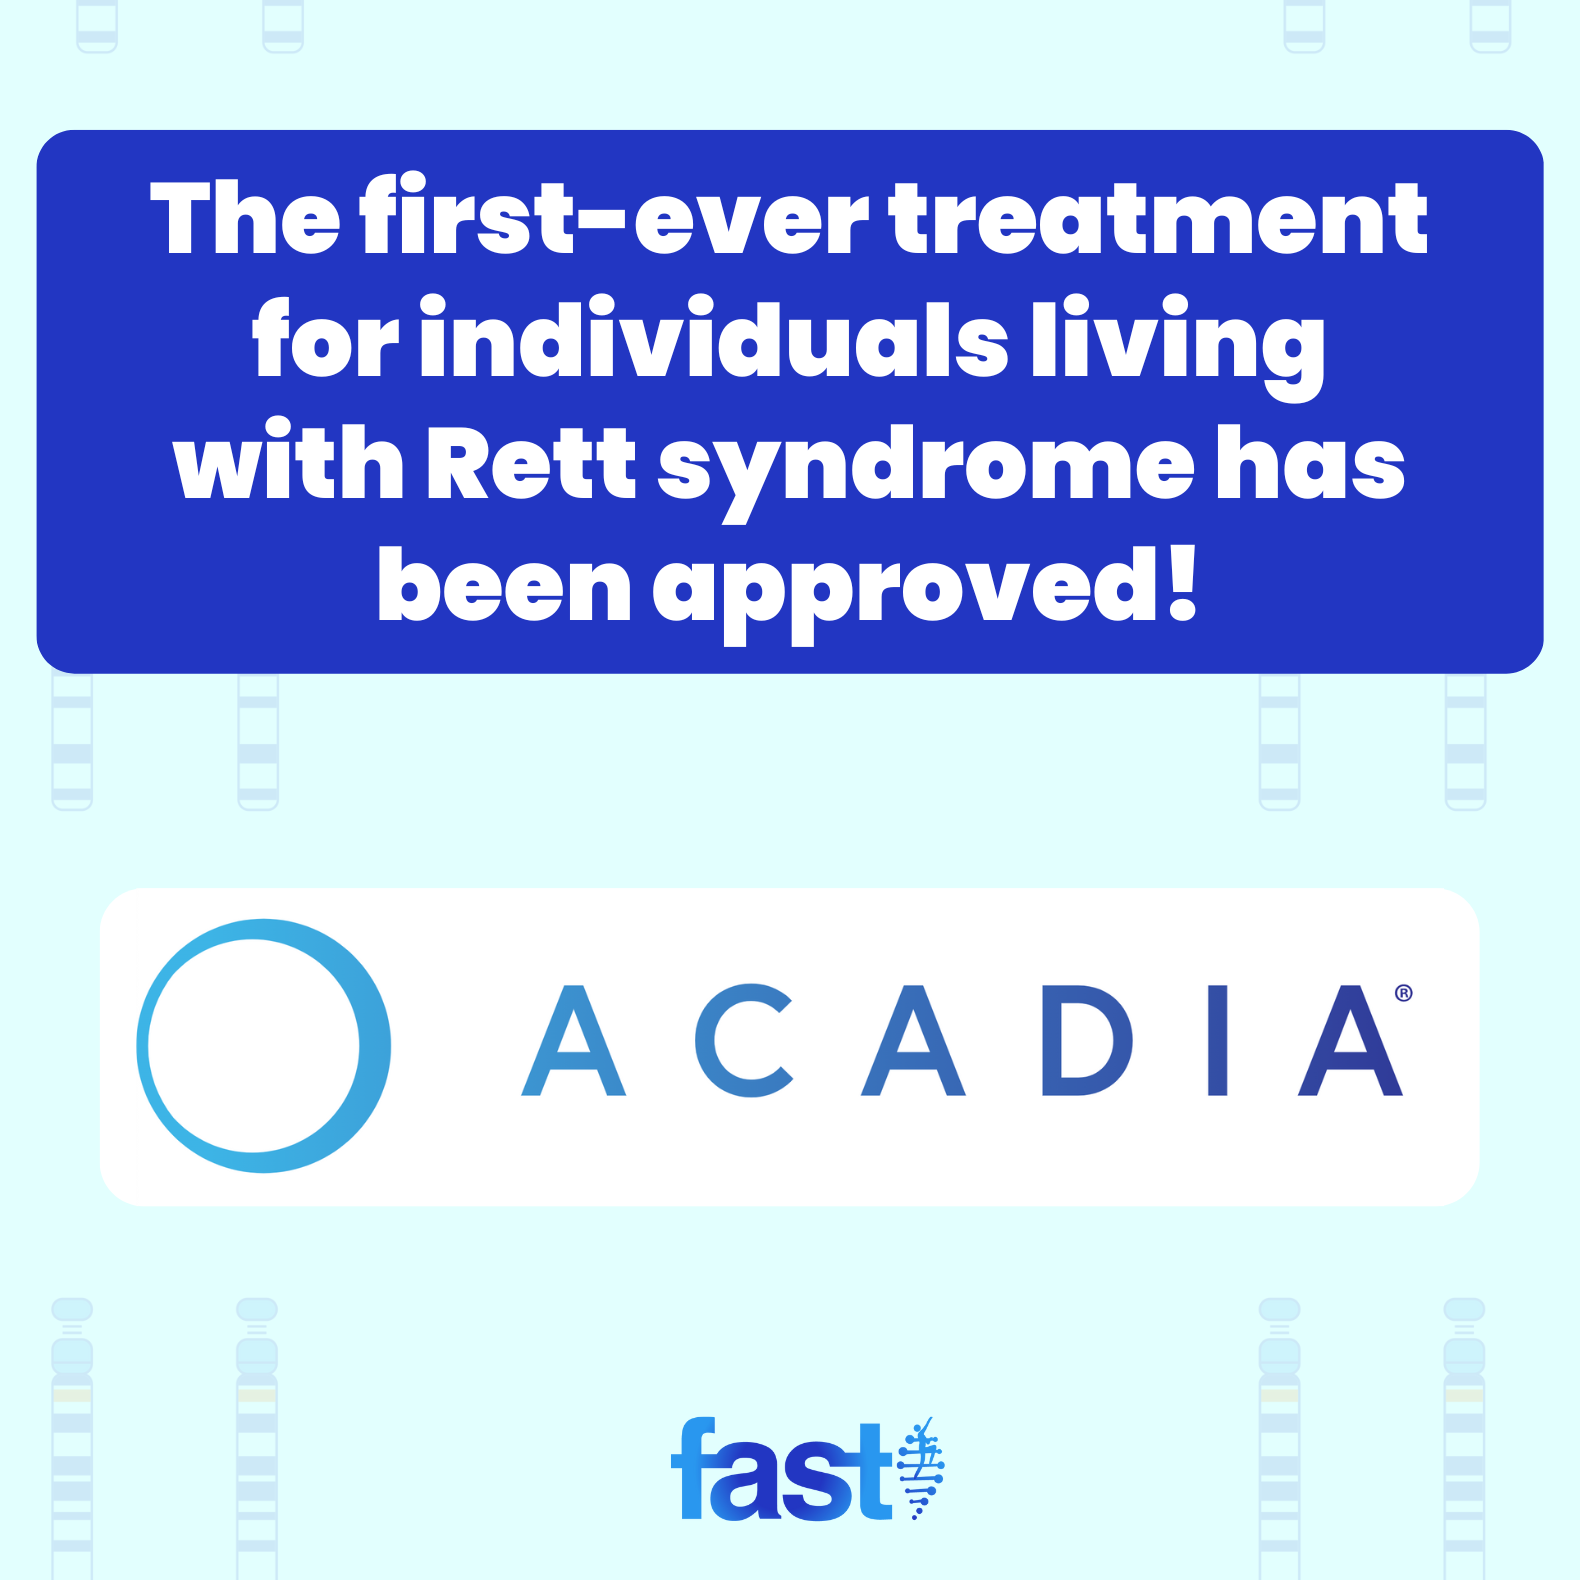 The first-ever treatment for individuals living with Rett syndrome has been approved! With Acadia’s logo